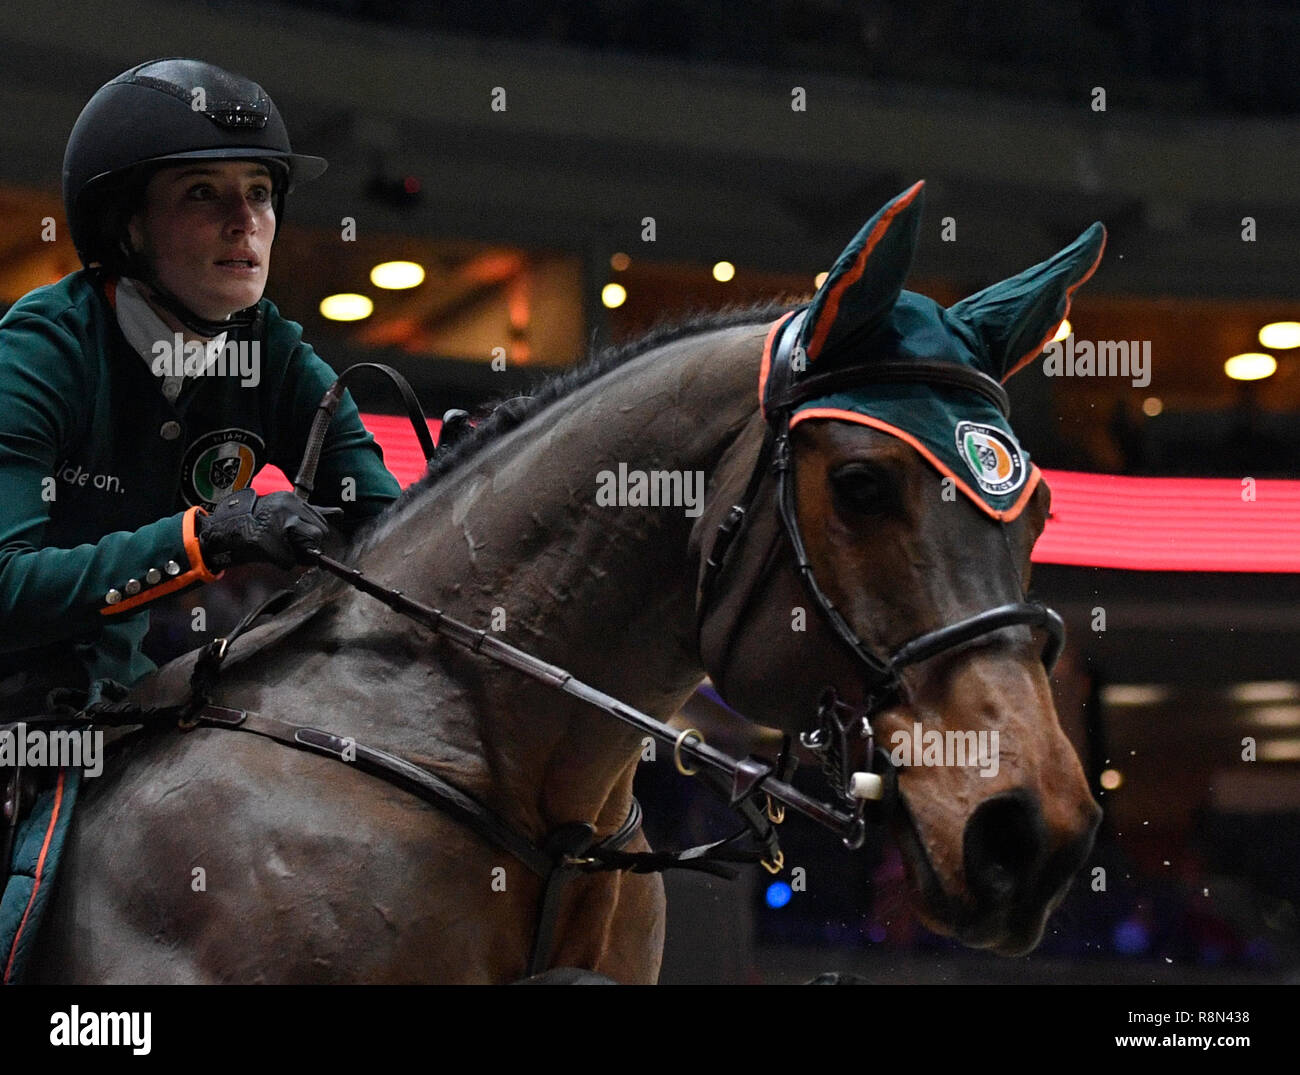 Prague, Czech Republic. 14th Dec, 2018. Jessica Springsteen, show jumper from Miami Celtics team, competes with horse called RMF Zecilie during Super Cup Teams race, semifinals, within the Global Champions League show jumping, in Prague, Czech Republic, on December 14, 2018. Credit: Michal Krumphanzl/CTK Photo/Alamy Live News Stock Photo